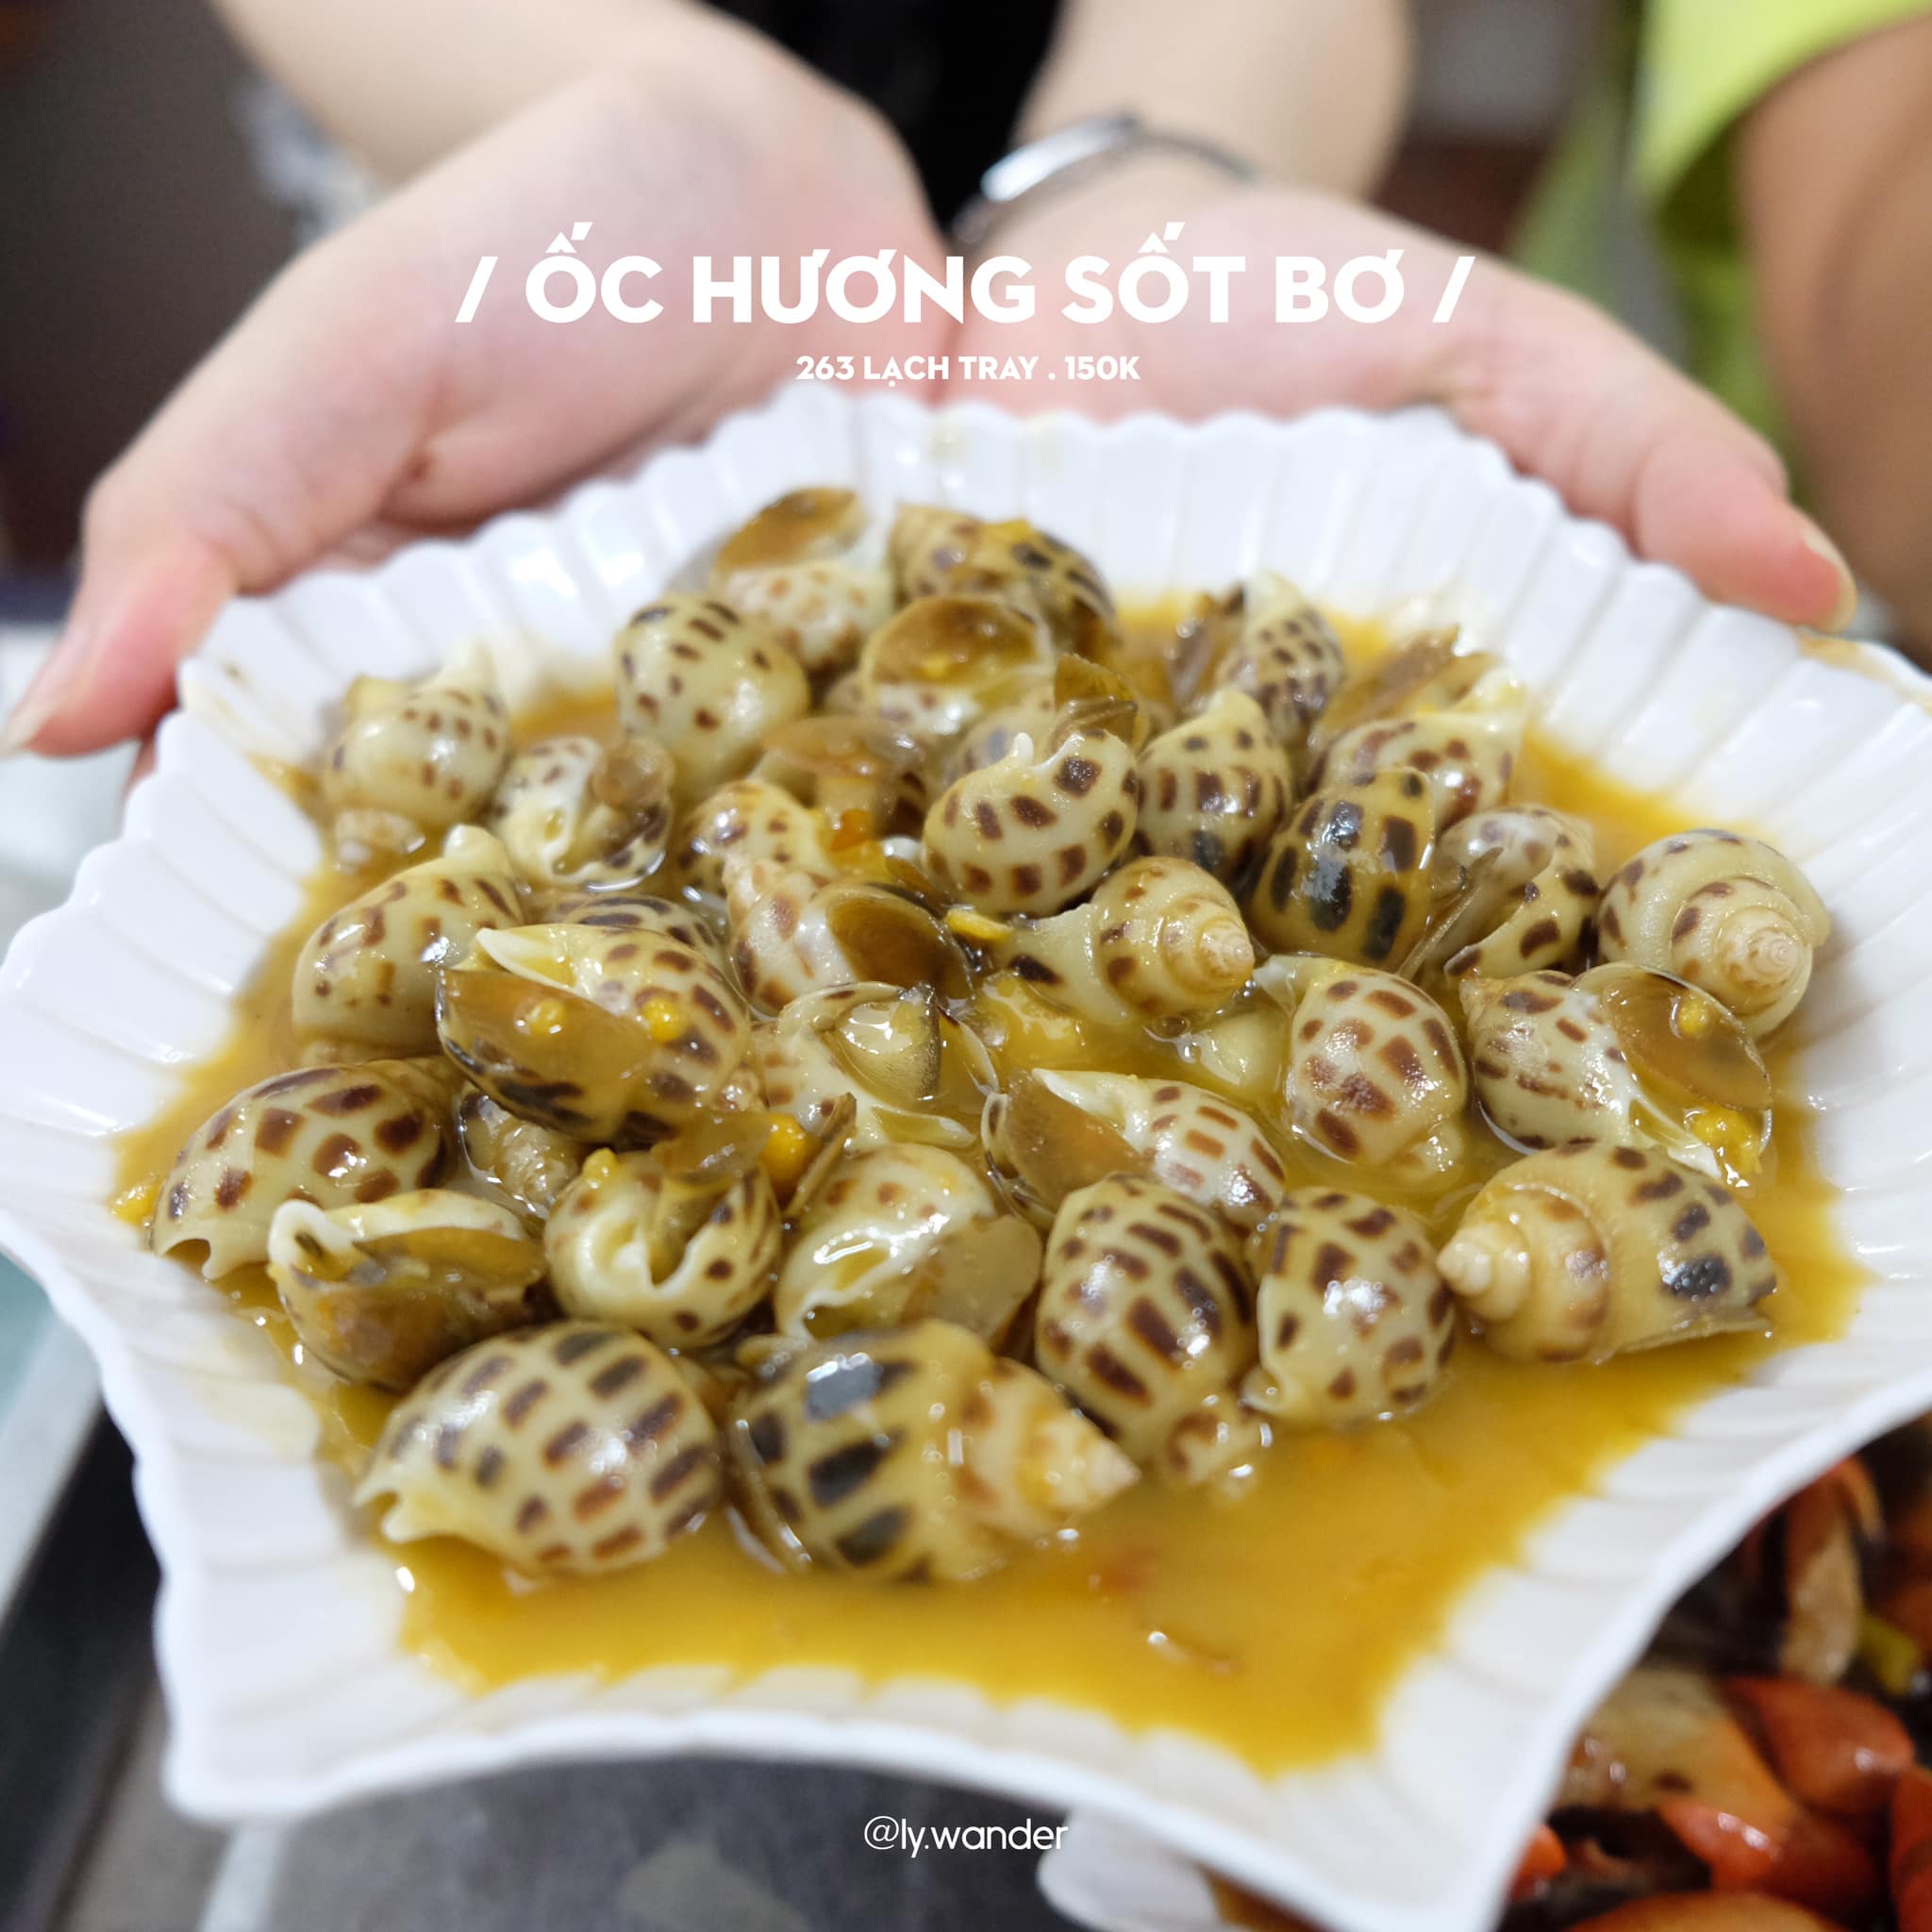 Oc huong sot bo (sautéed sweet snails with butter sauce). Photo: Ly Nguyen / Tuoi Tre